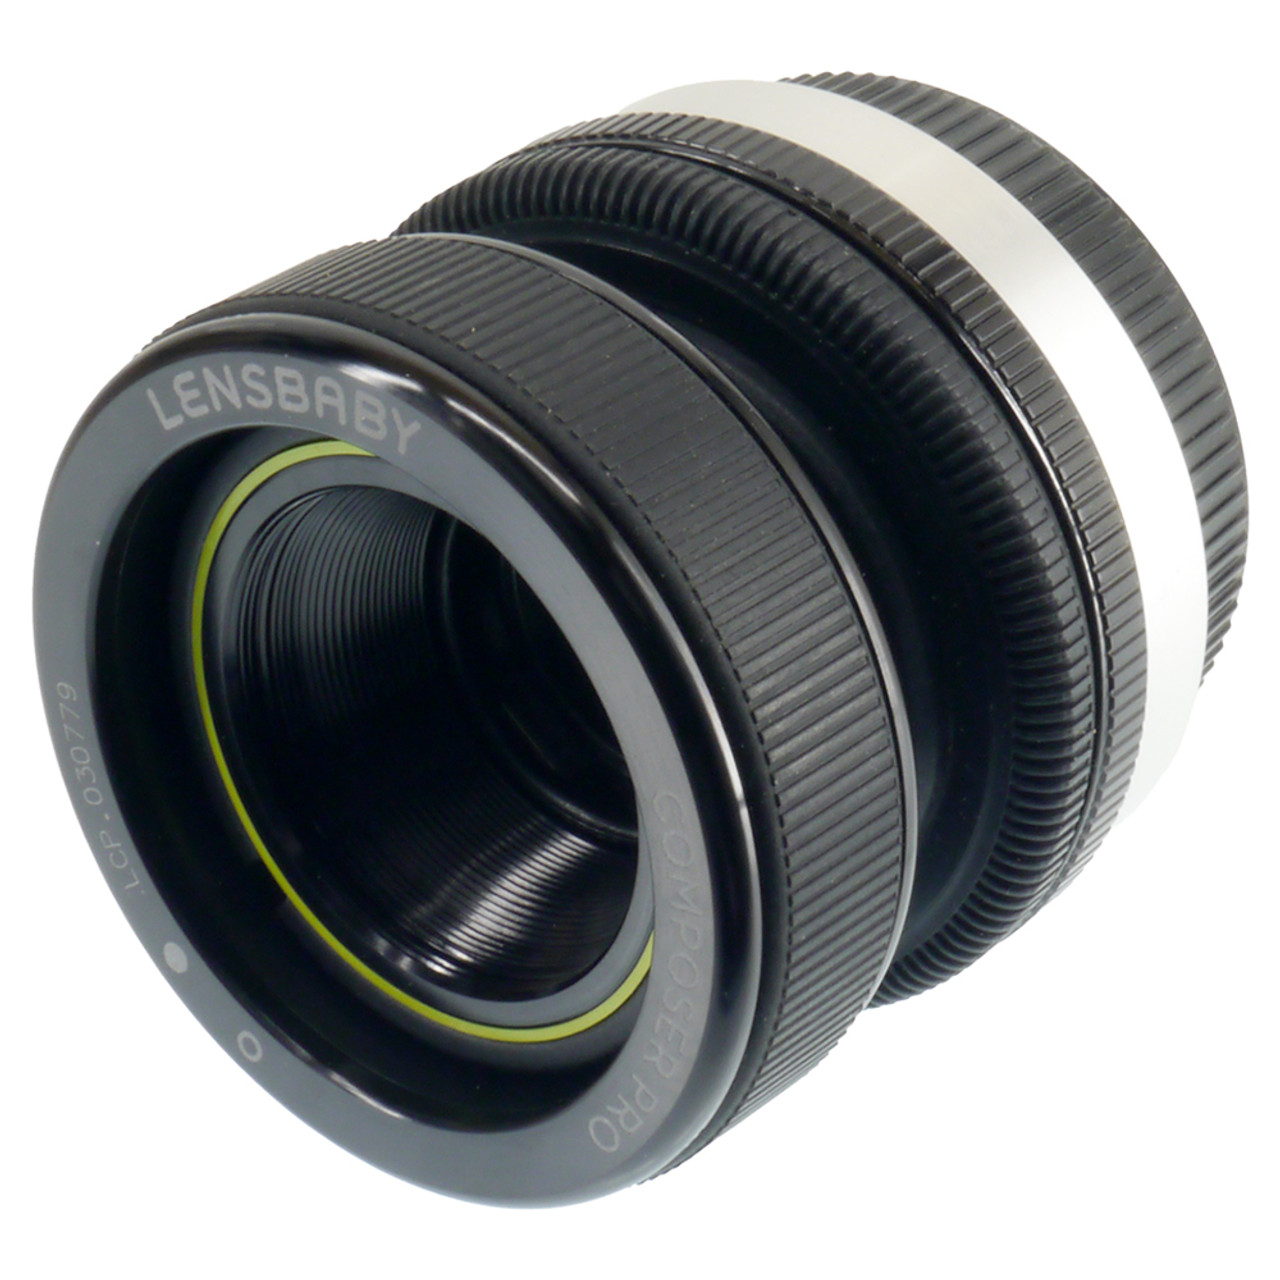 USED LENSBABY COMPOSER DOUBLE GLASS (762967)